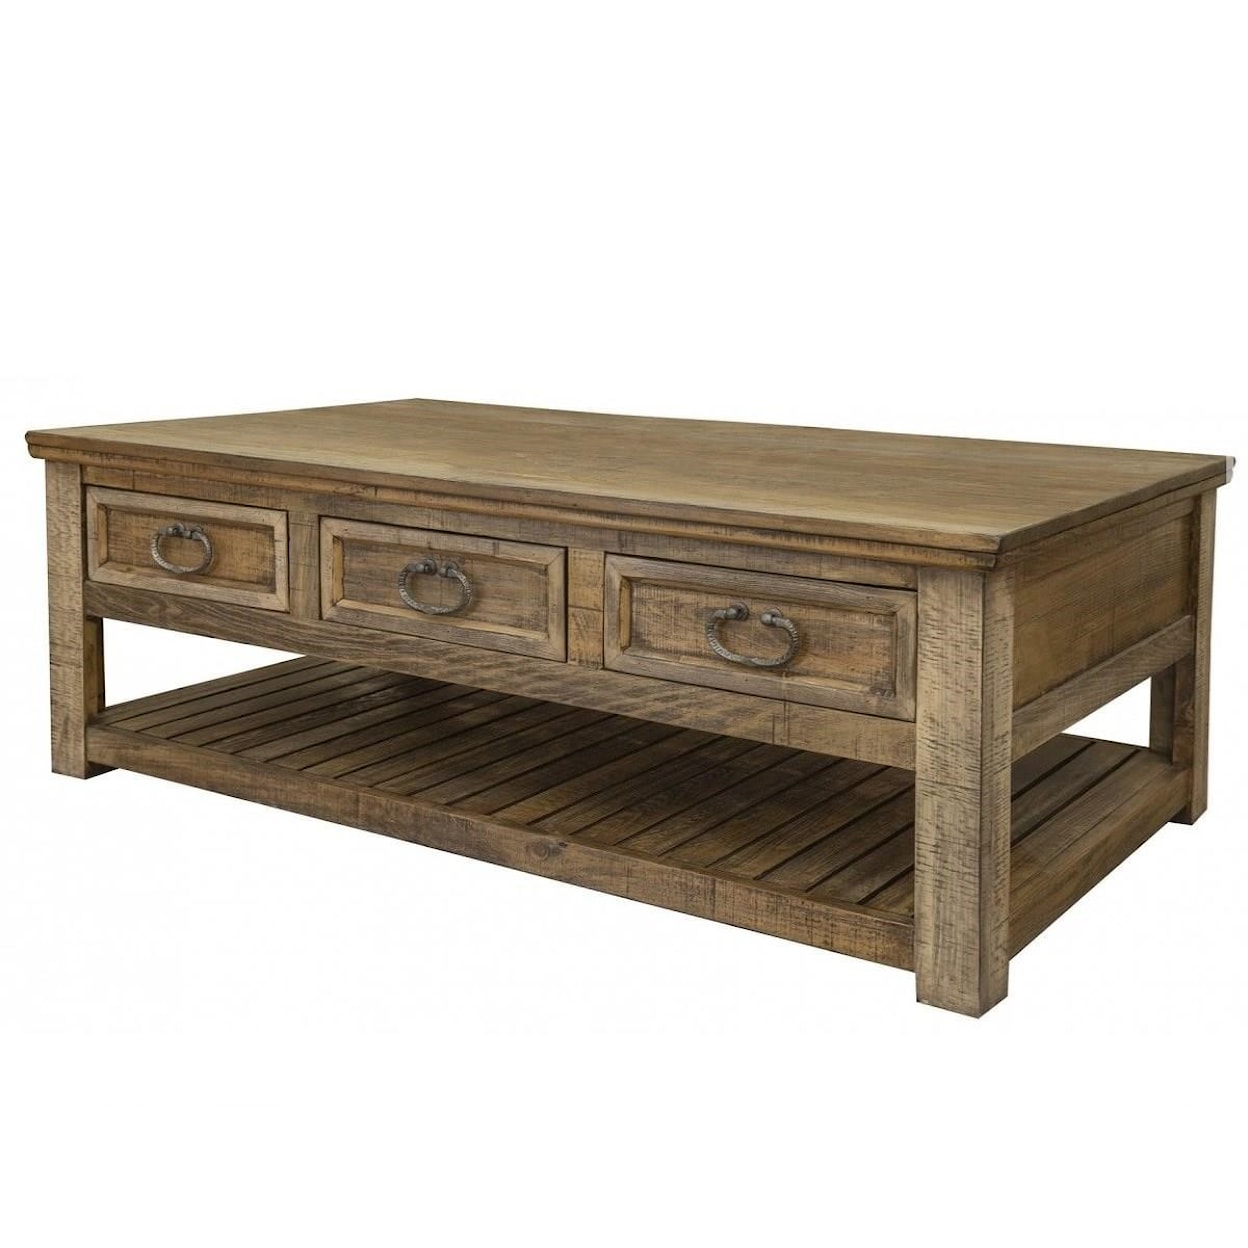 IFD International Furniture Direct Montana Cocktail Table with 6 Drawers